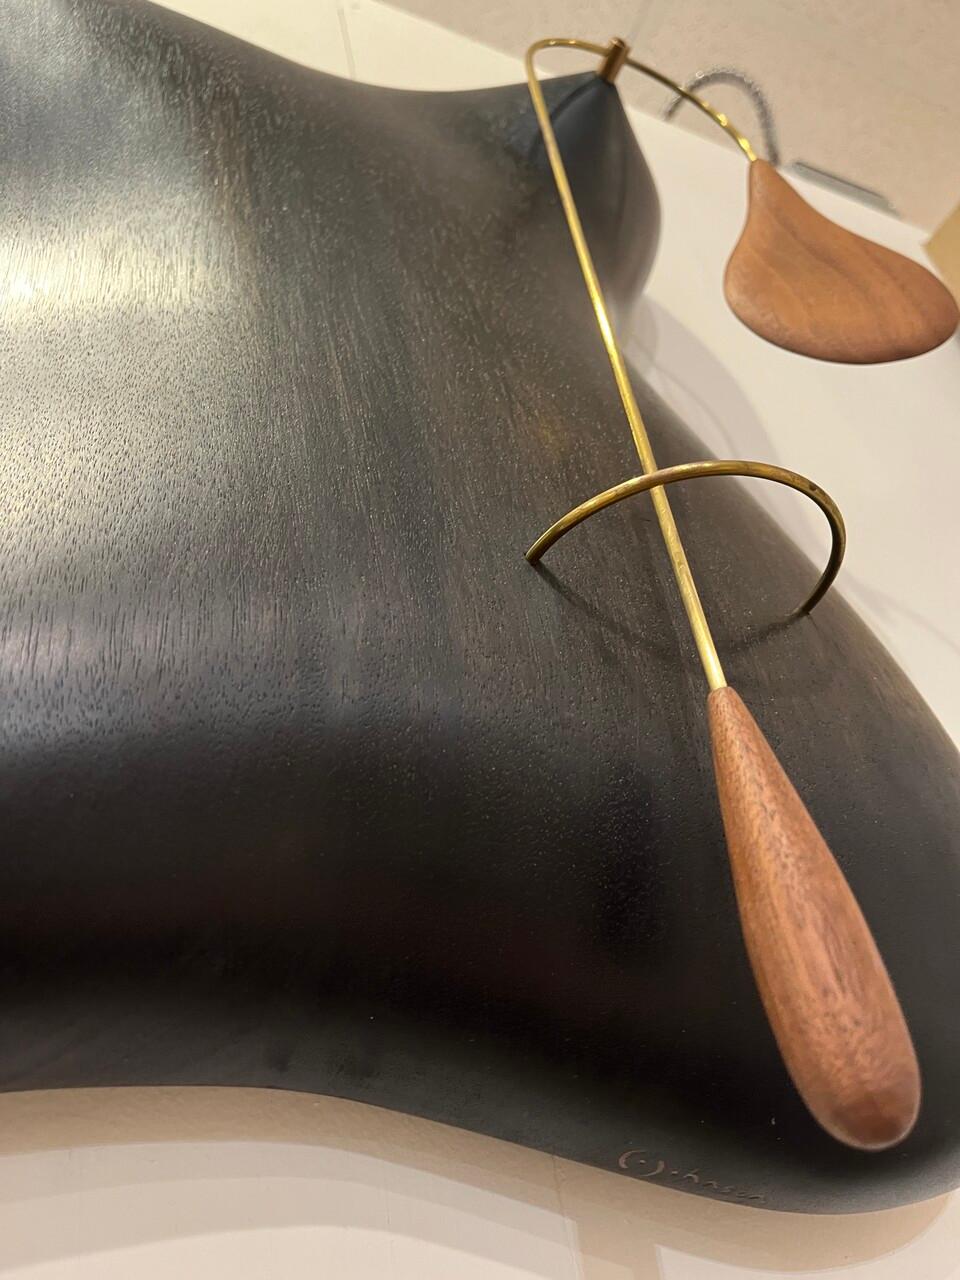 Organic Wood Carved Mobile Sculpture by Casey Johnson. A beautiful curvy mixed media piece reminiscent of Noguchi's freeform style. The wood is ebonized and polished smooth, you can't help but want to touch it!